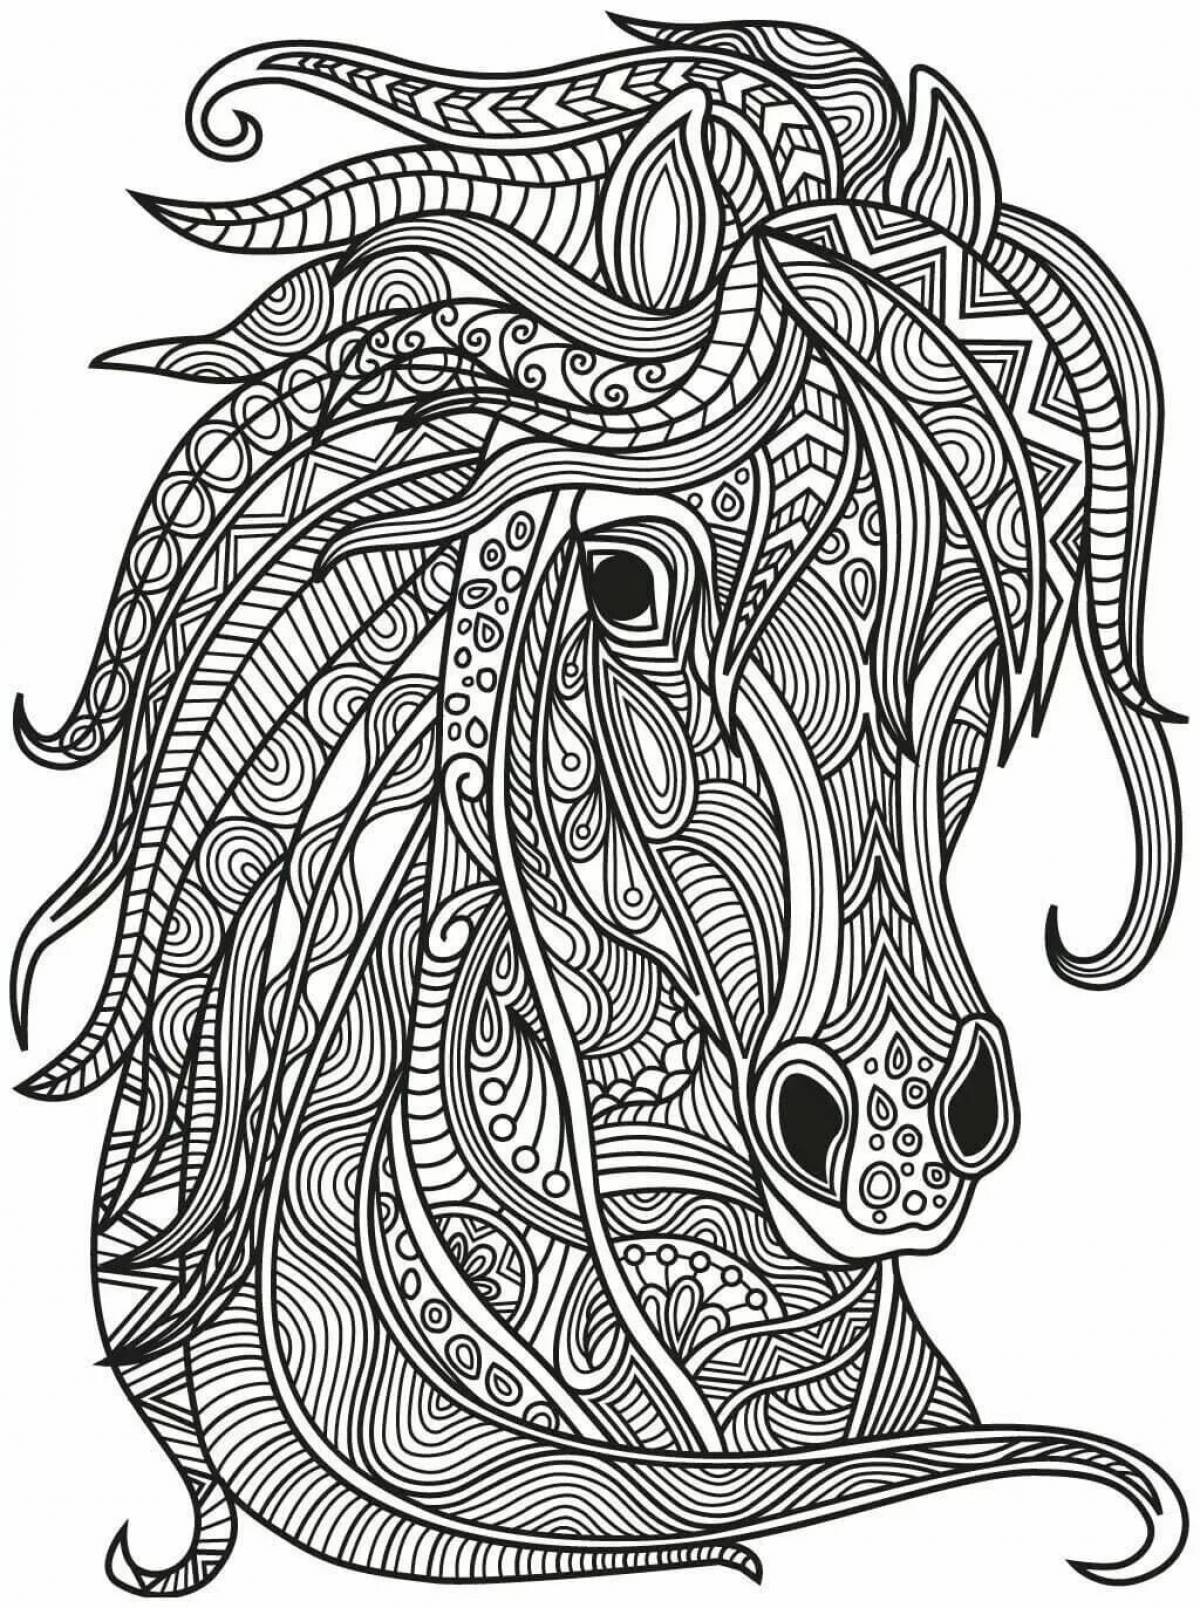 Coloring for stress relief to relax the nervous system